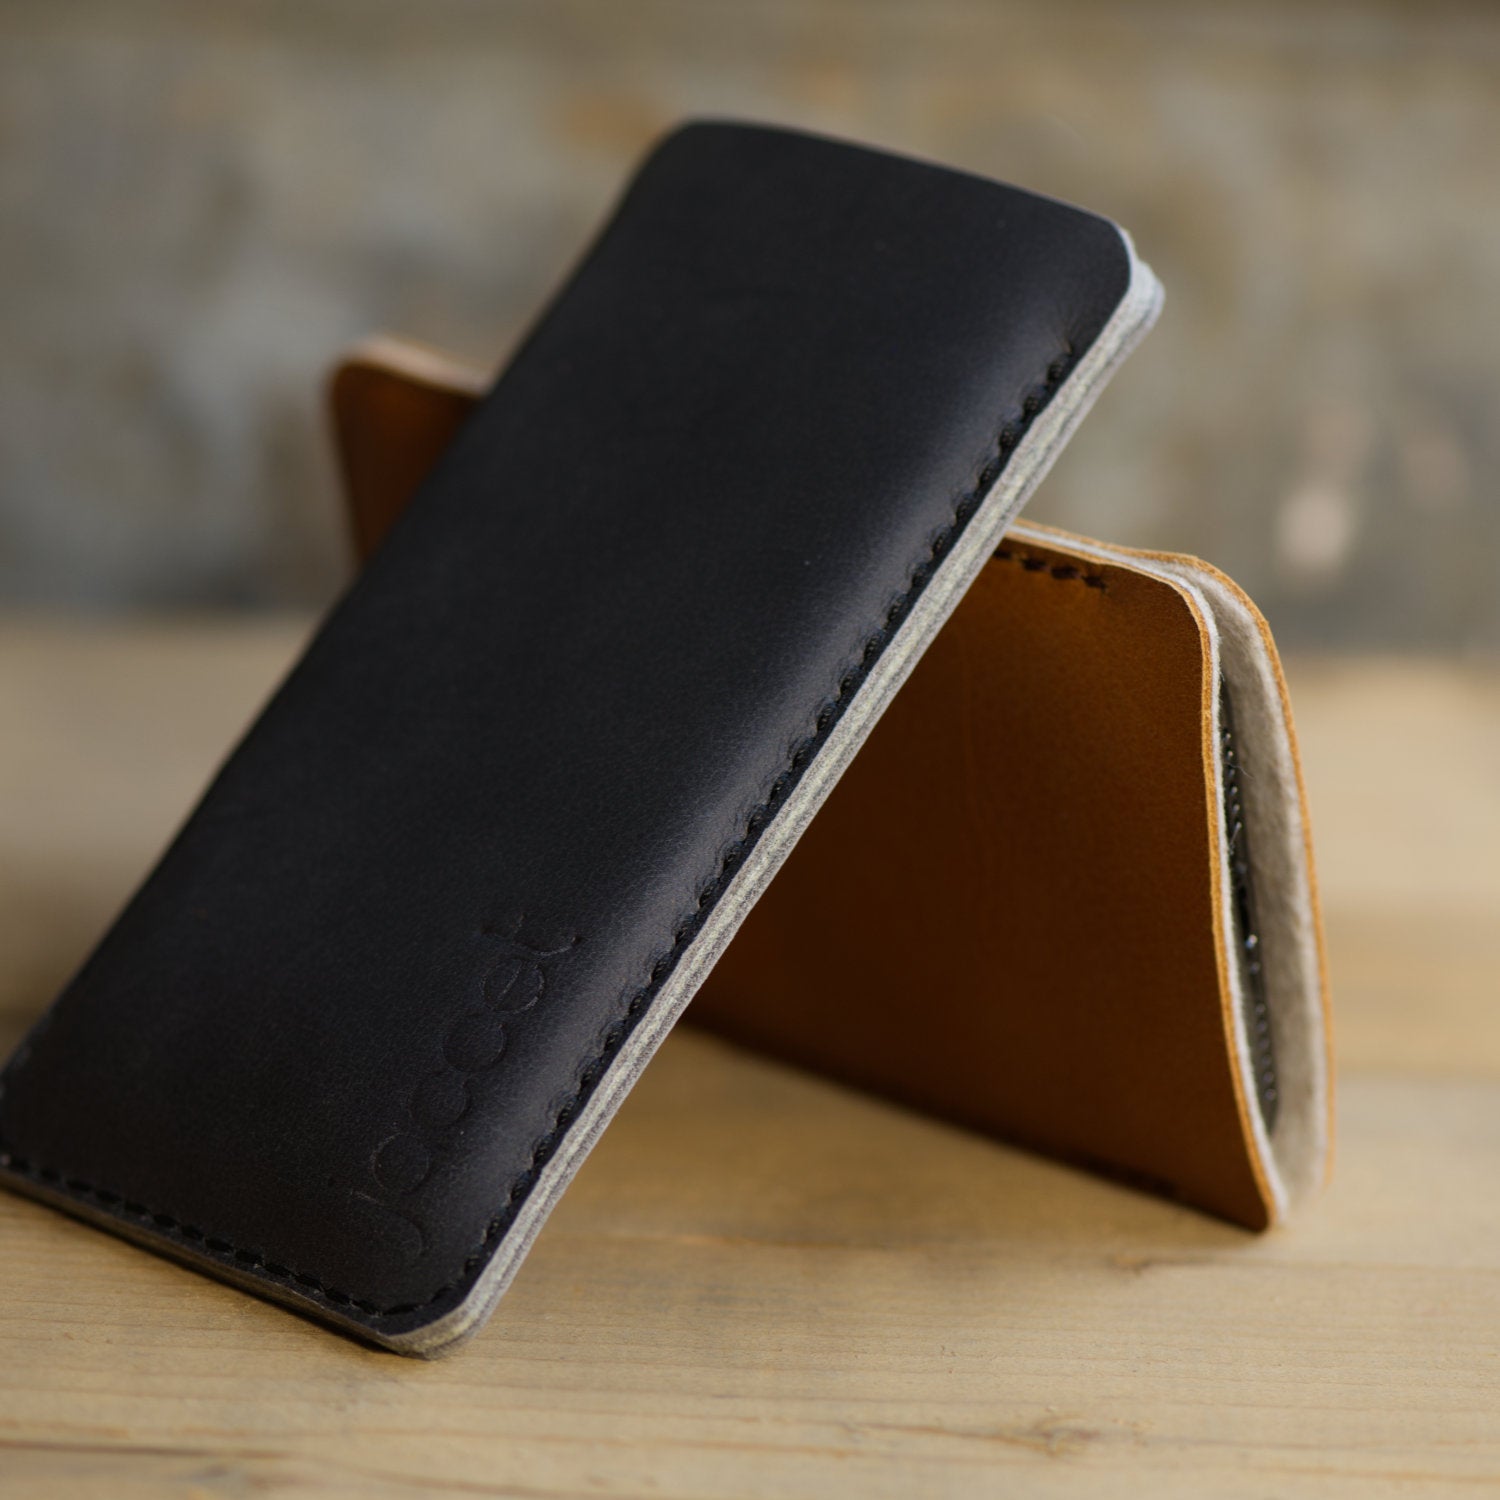 JACCET leather Xiaomi sleeve - anthracite/black leather with grey wool felt. 100% Handmade